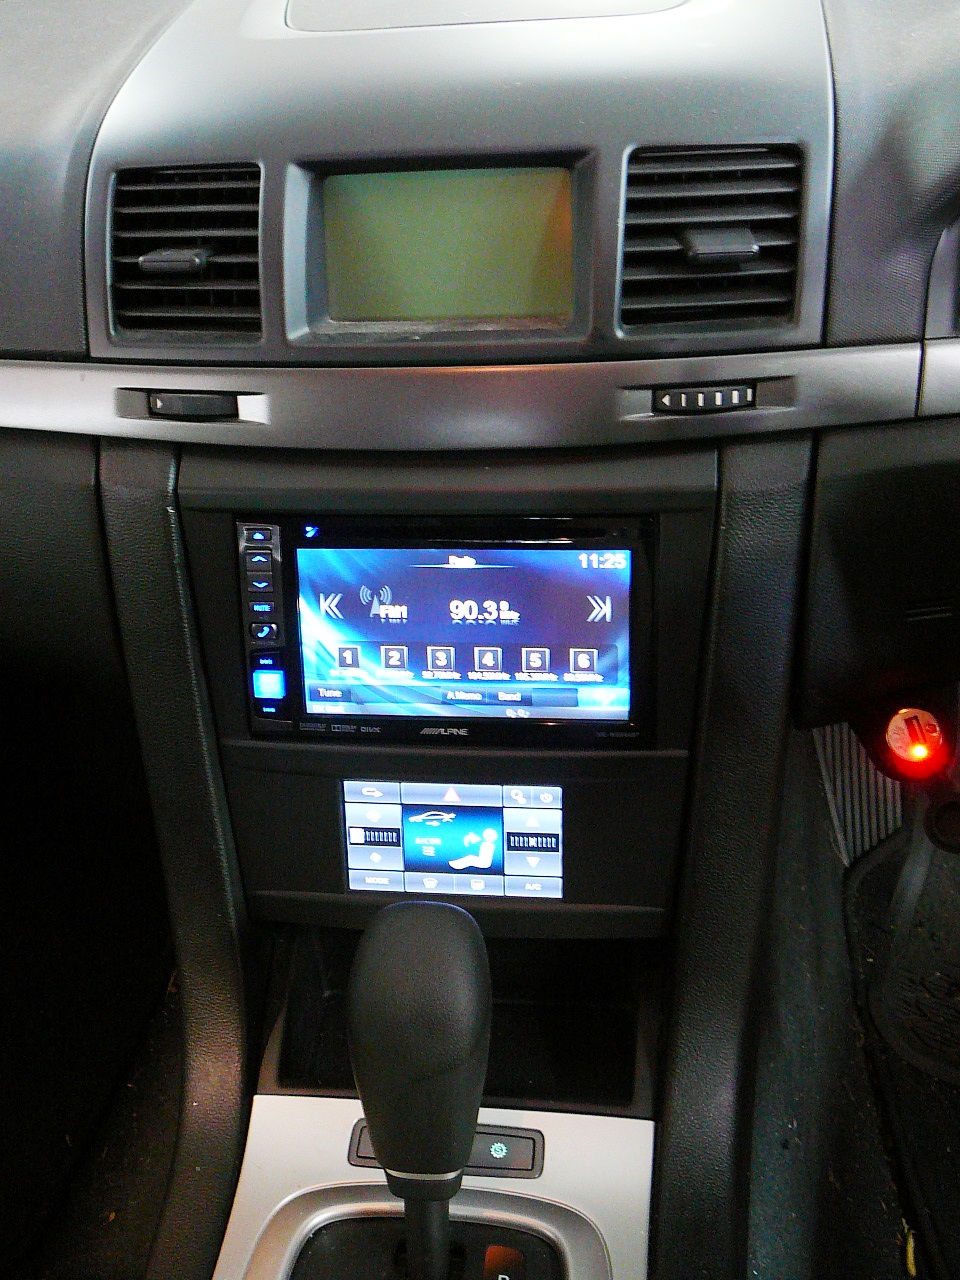 Holden Commodore VE, Alpine IVE-W554ABT & Alpine VE Fascia with Touch Screen A/C Controls